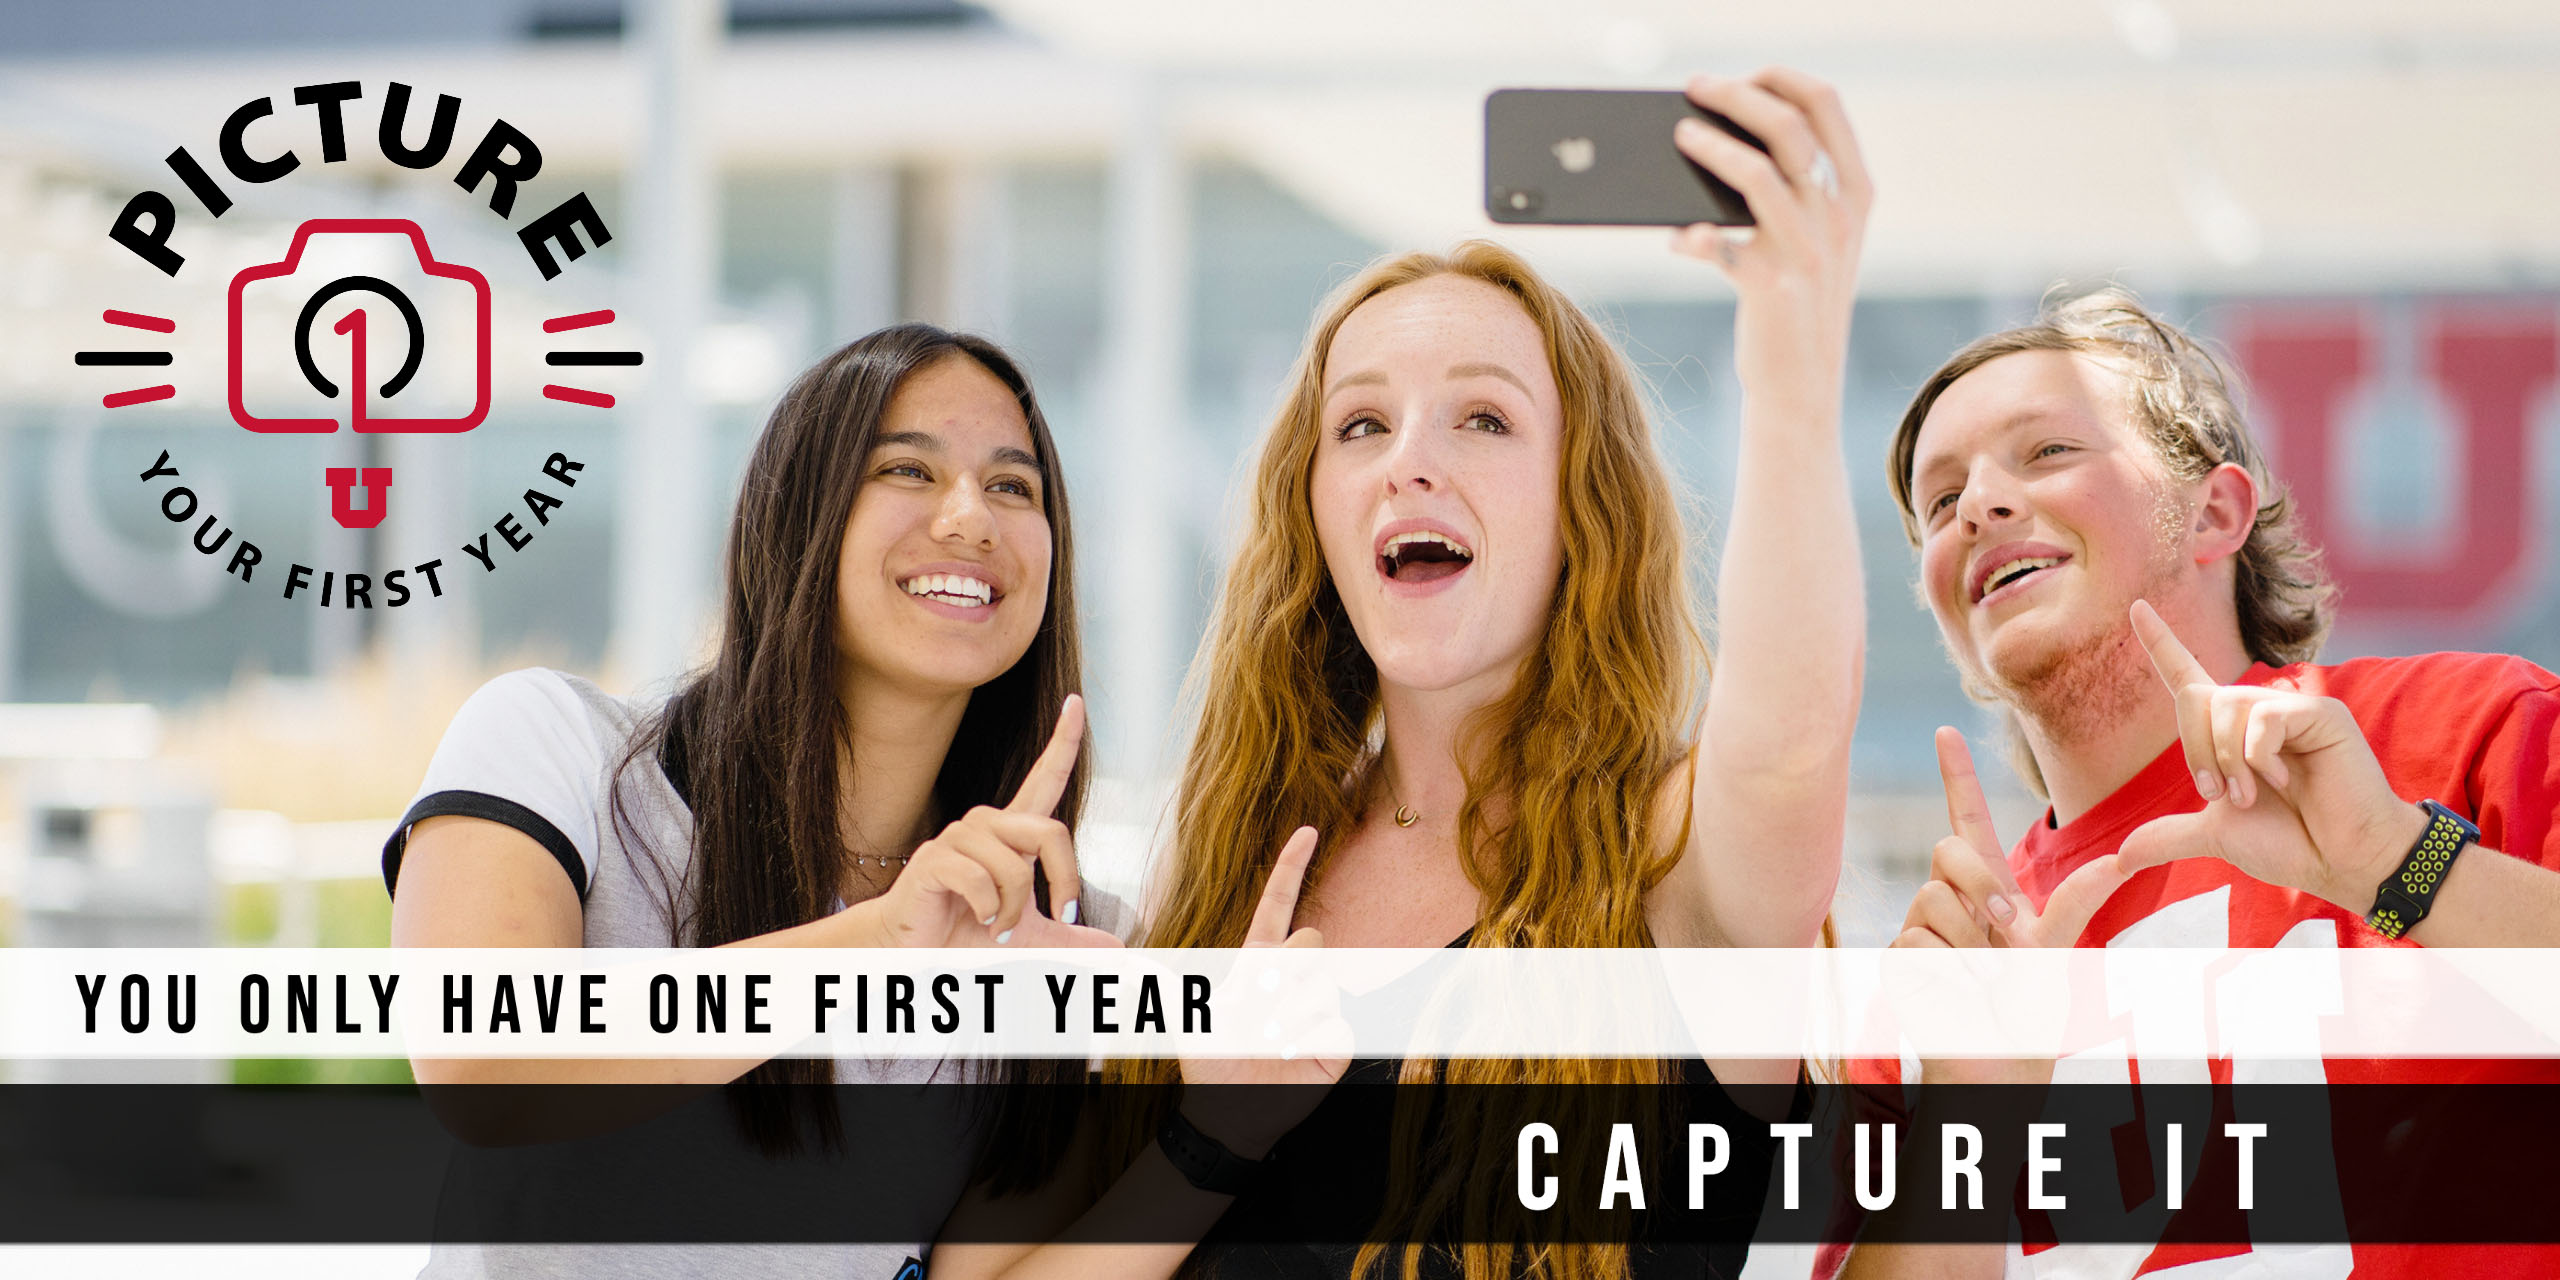 Picture Your First Year. You only have one first year--capture it!